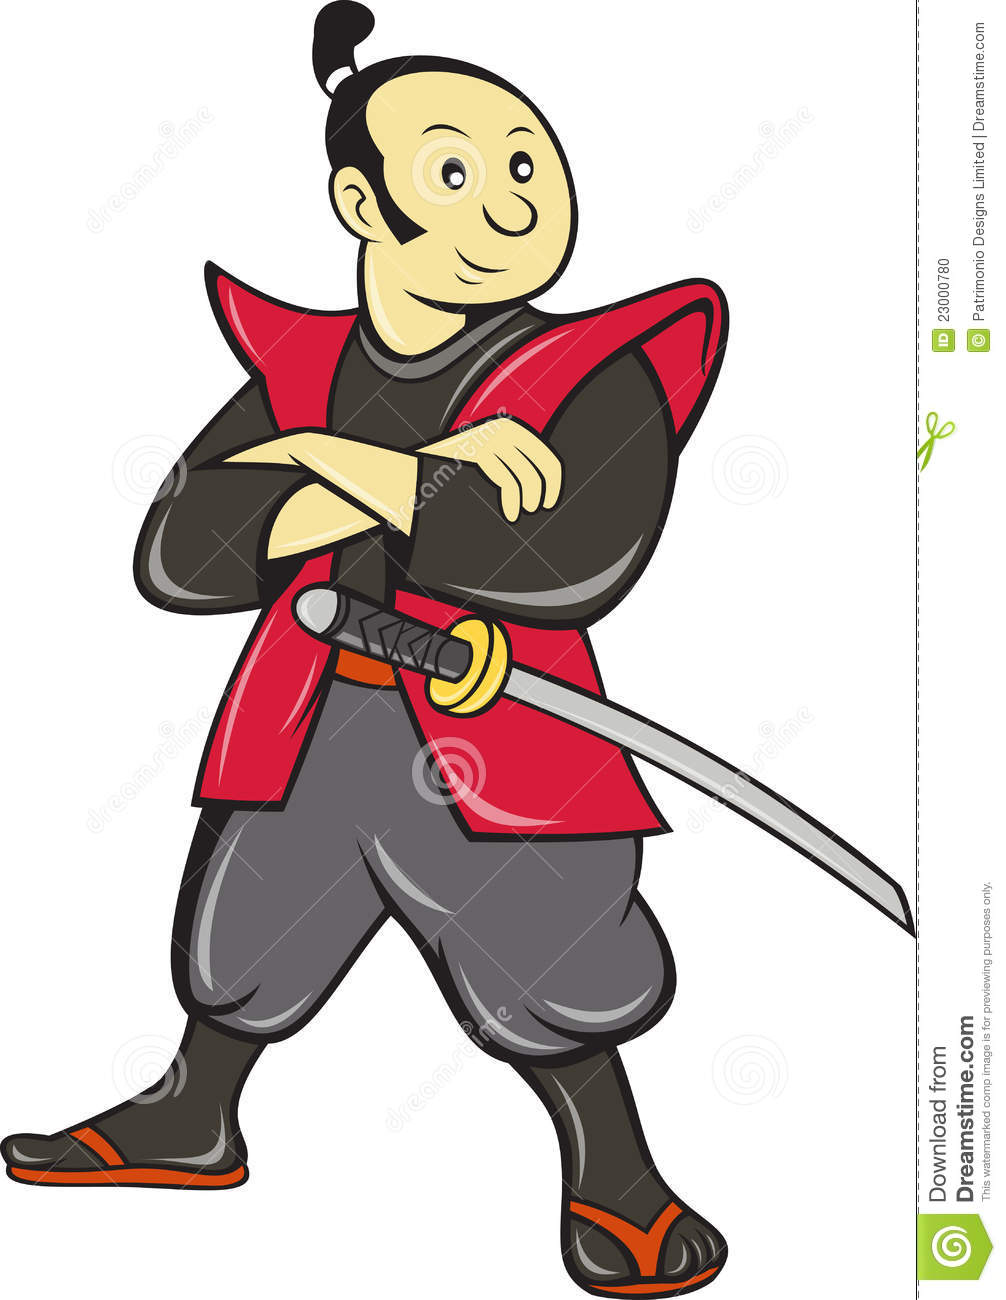 Illustration Of A Japanese Samurai Warrior With Sword Done In Cartoon